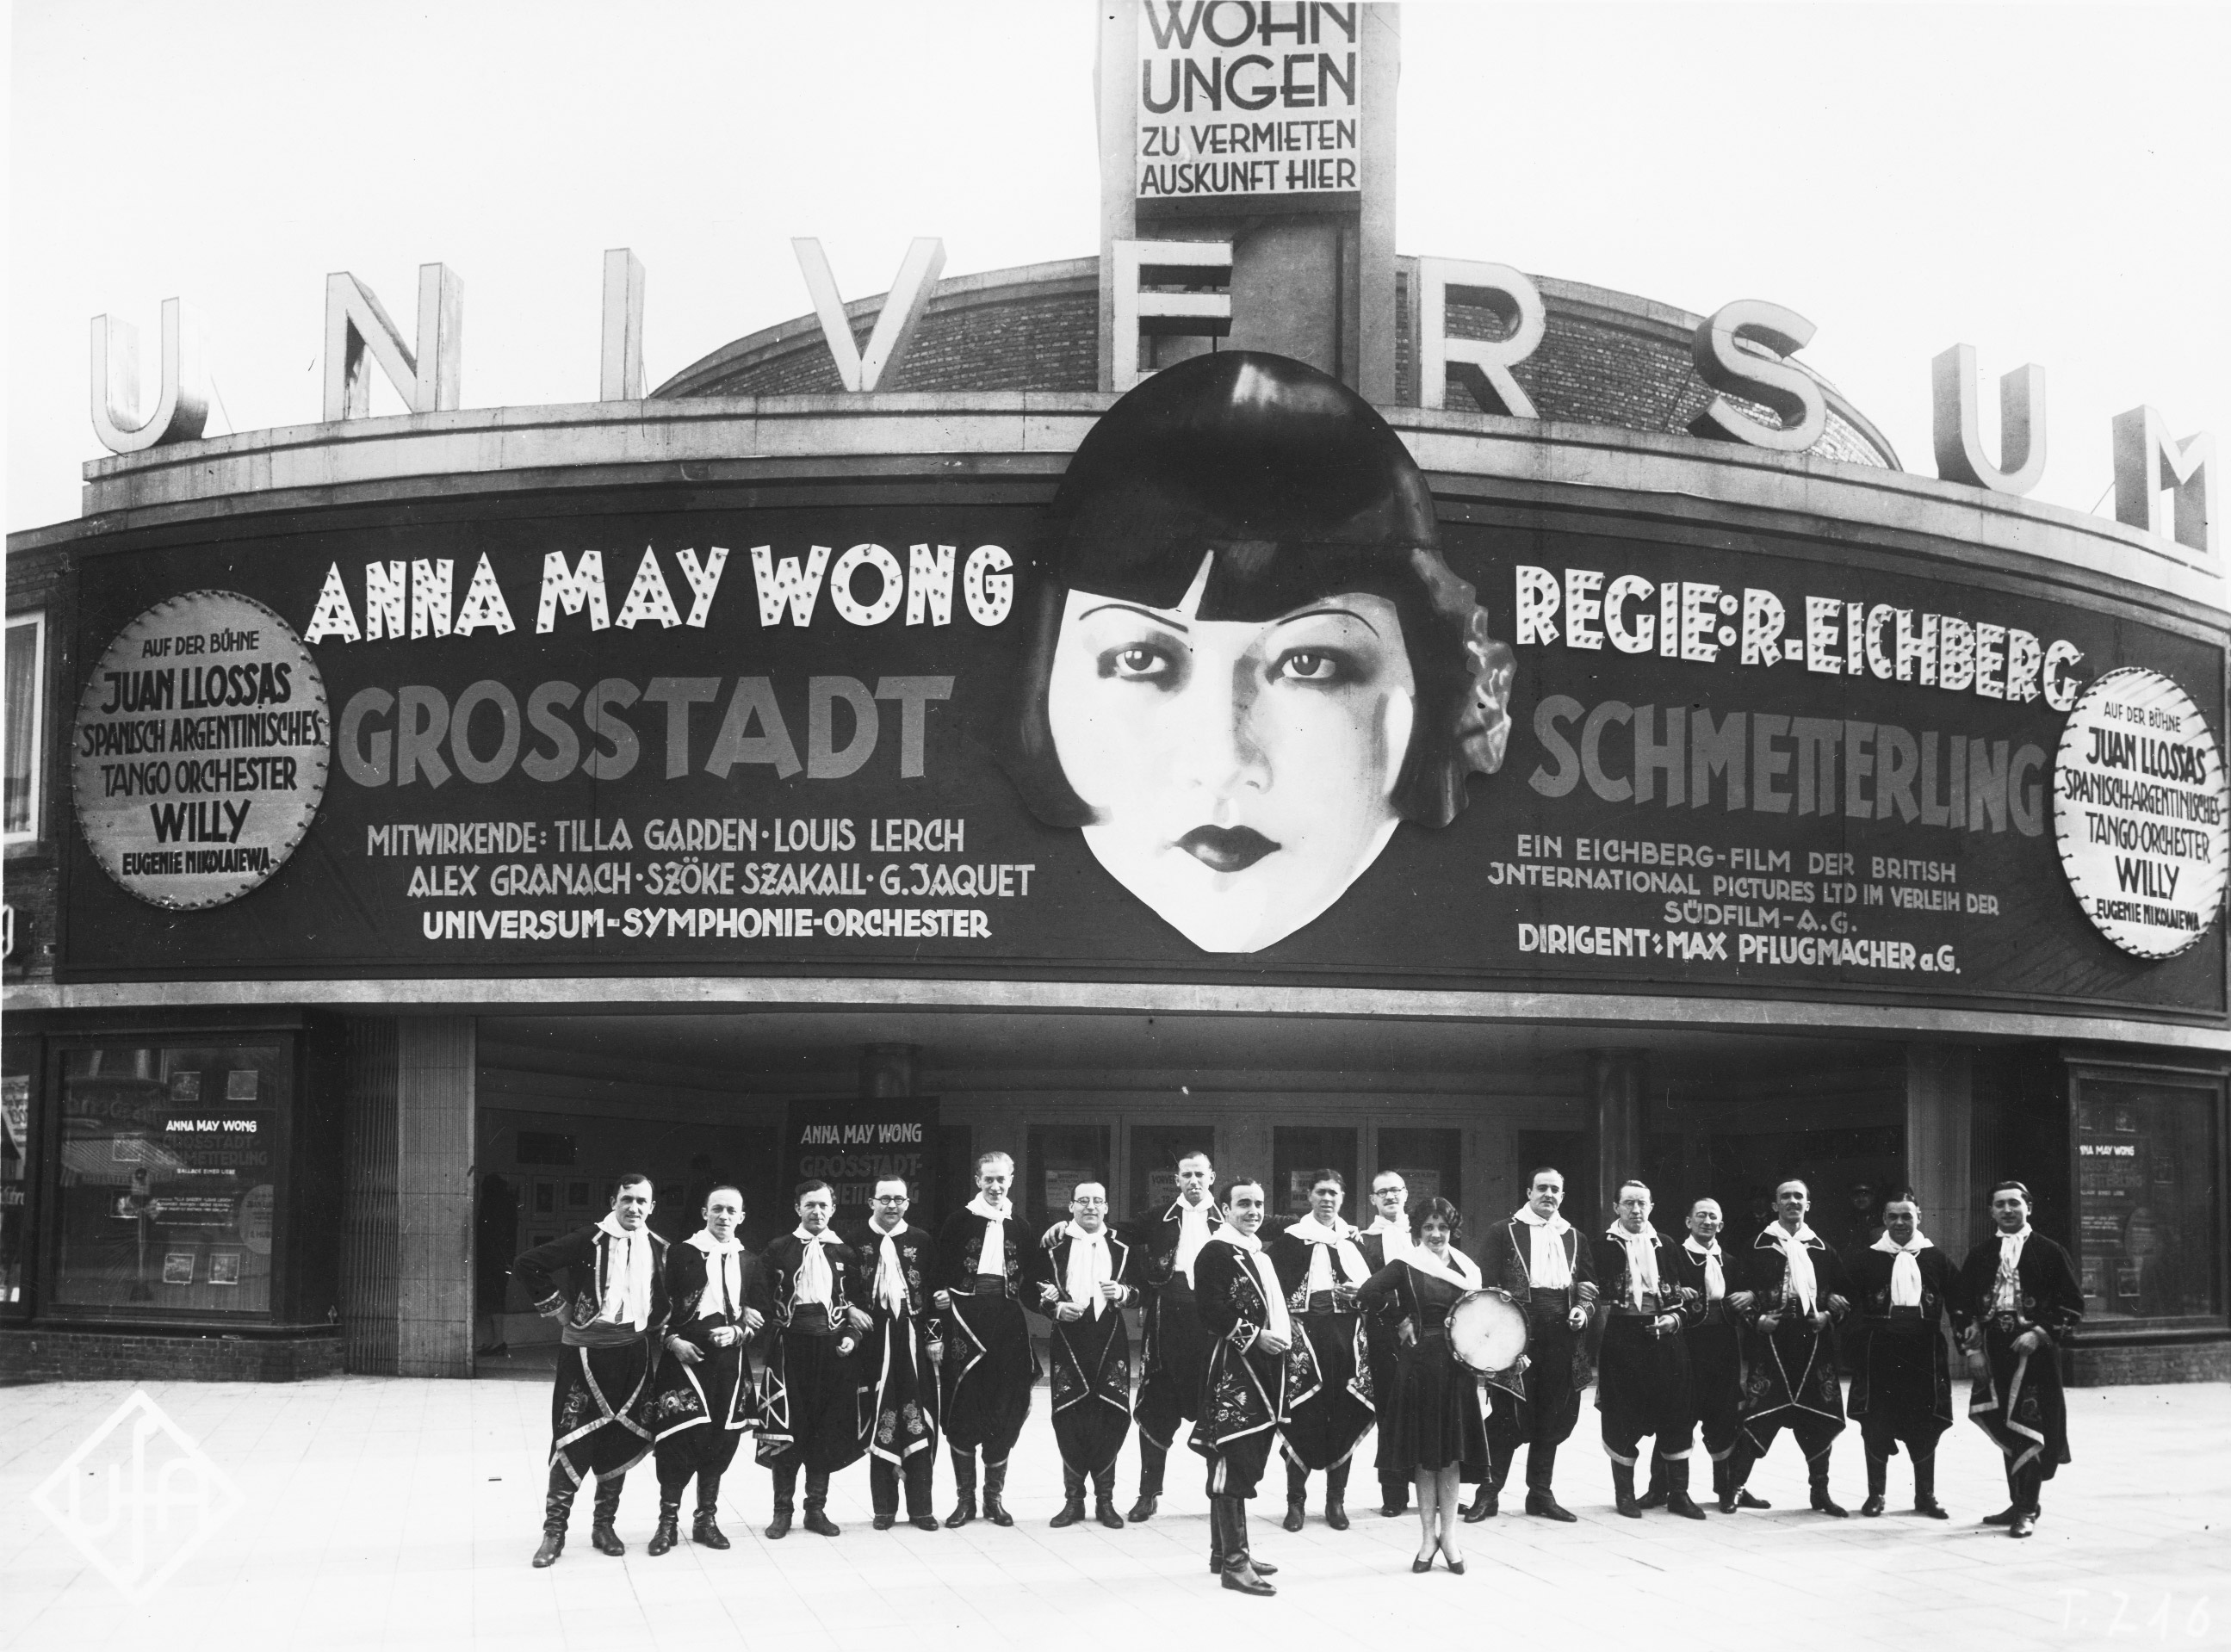 Black and white photo: a group of dressed-up people posing in front of the cinema with a big advertisement showing Anna May Wong's face, advertising for a film featuring her